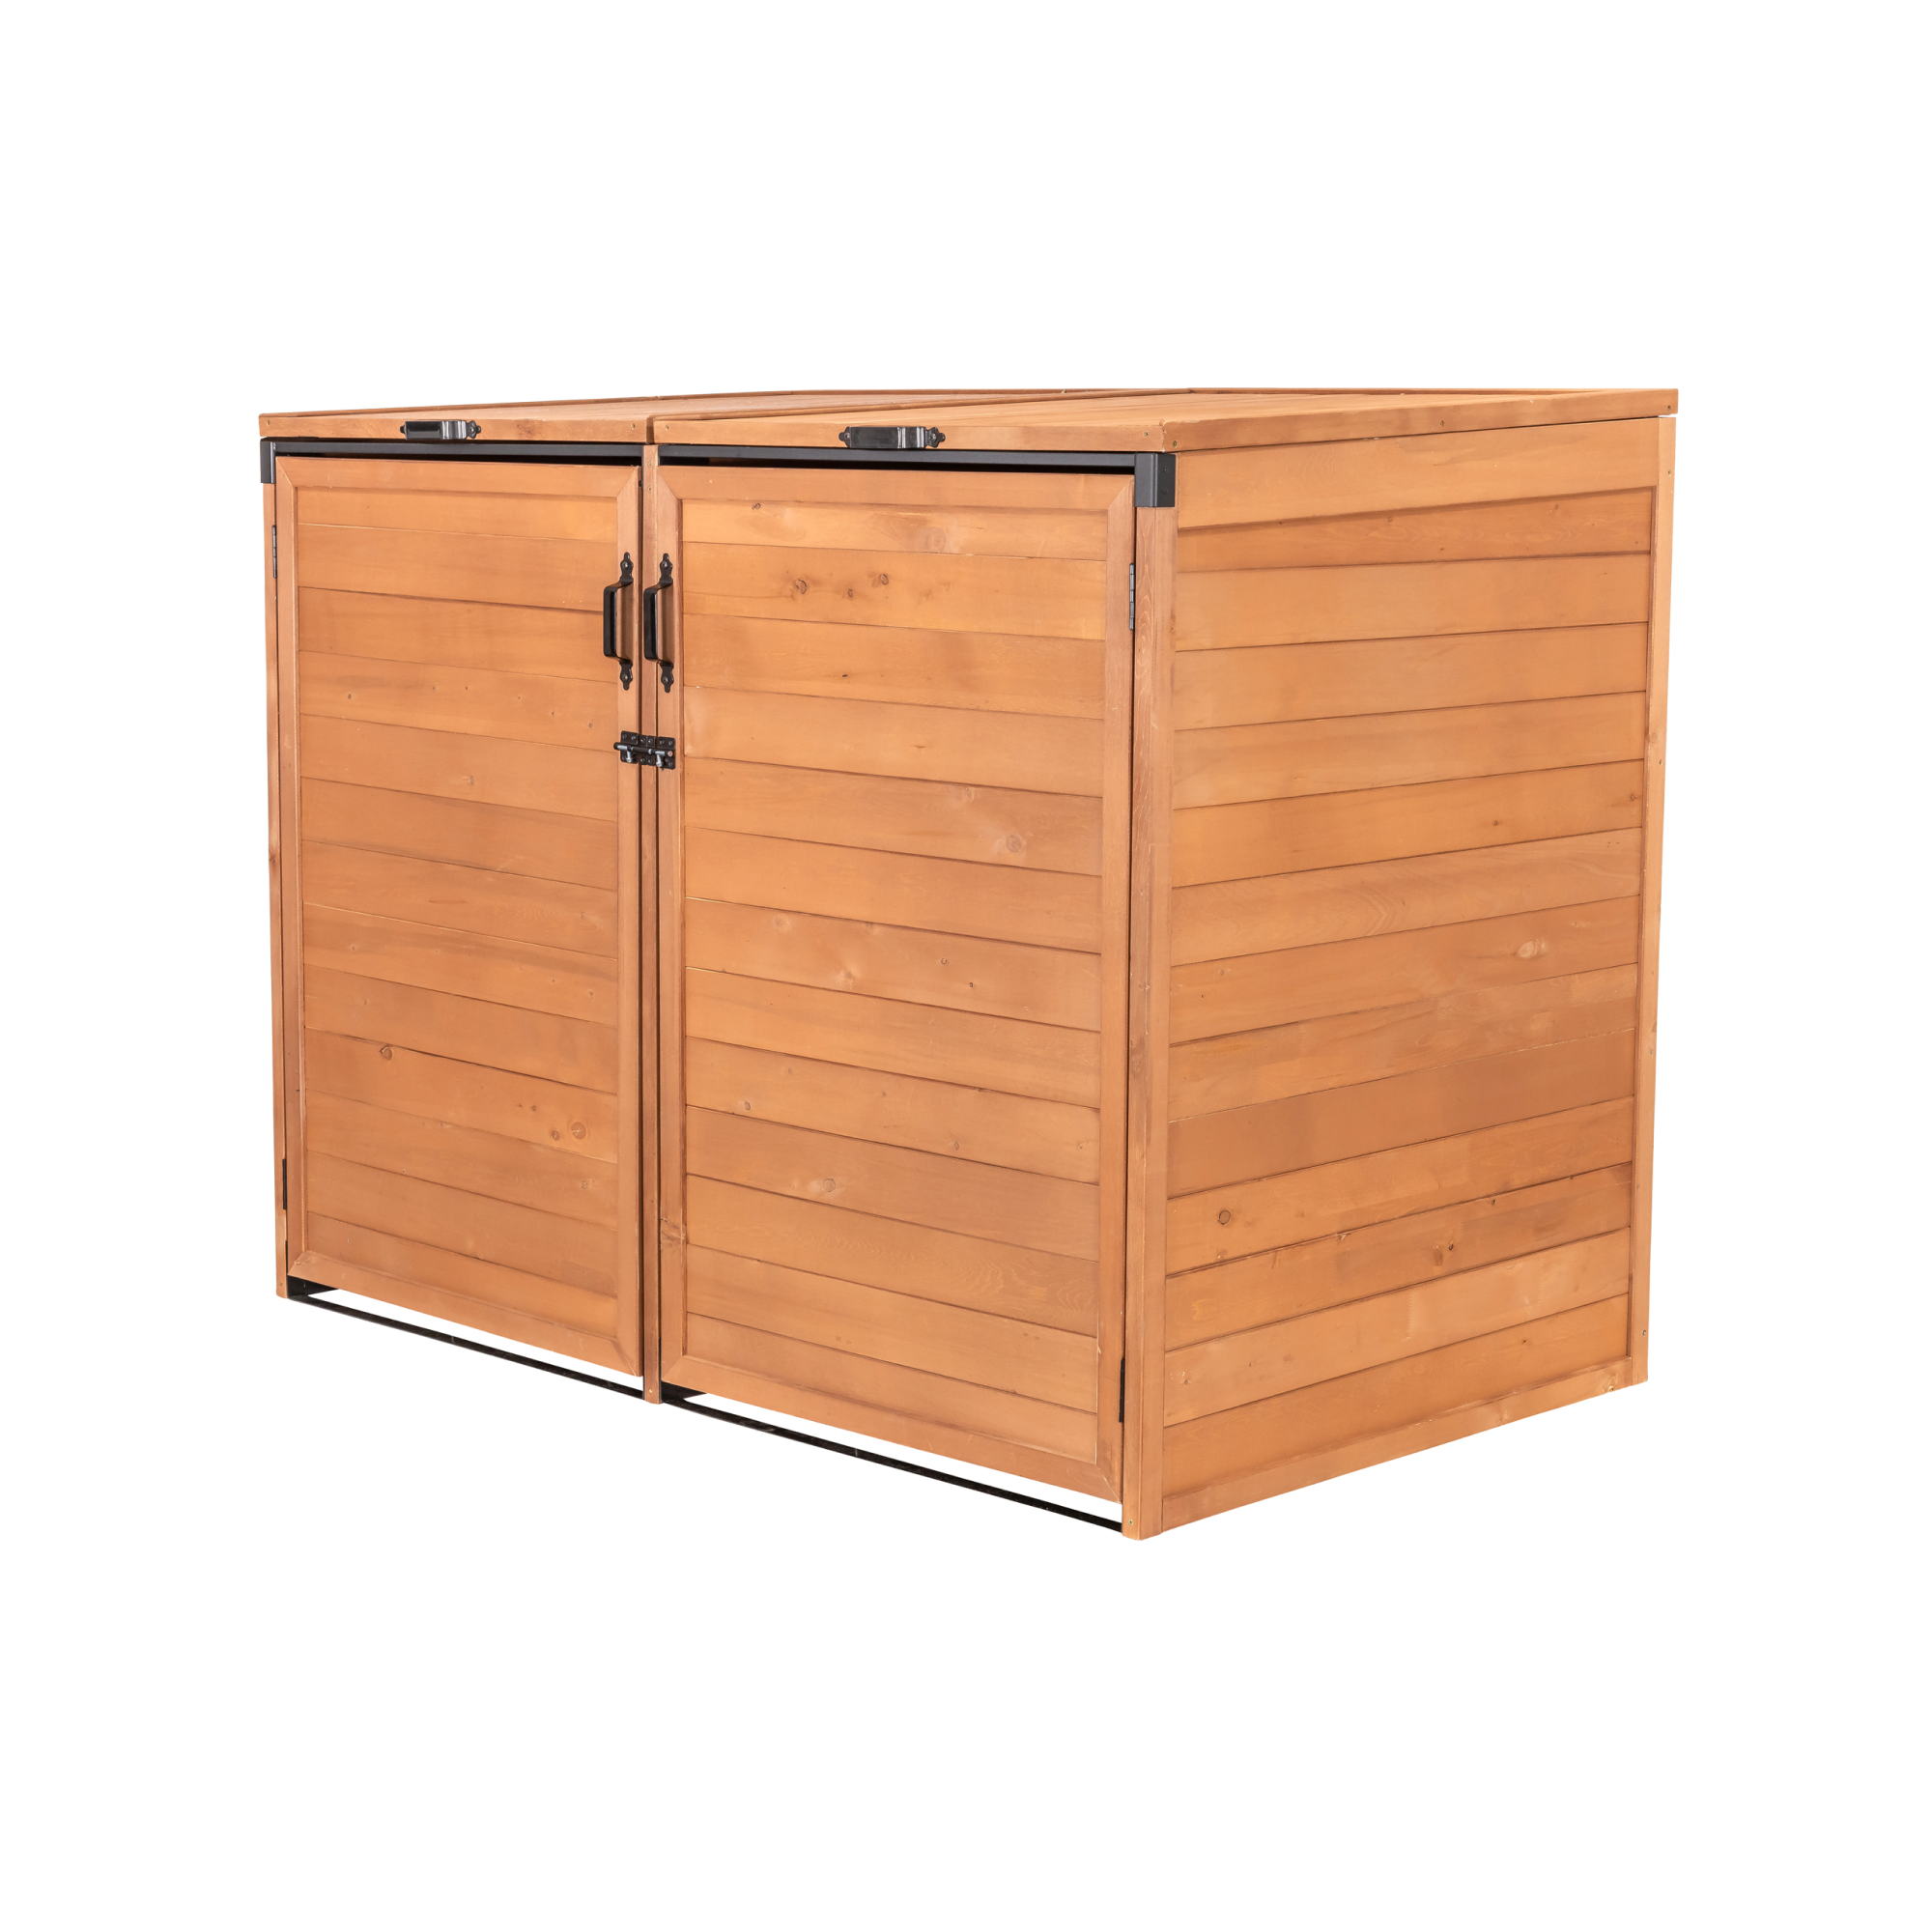 Large Horizontal Trash and Recycling Storage Shed